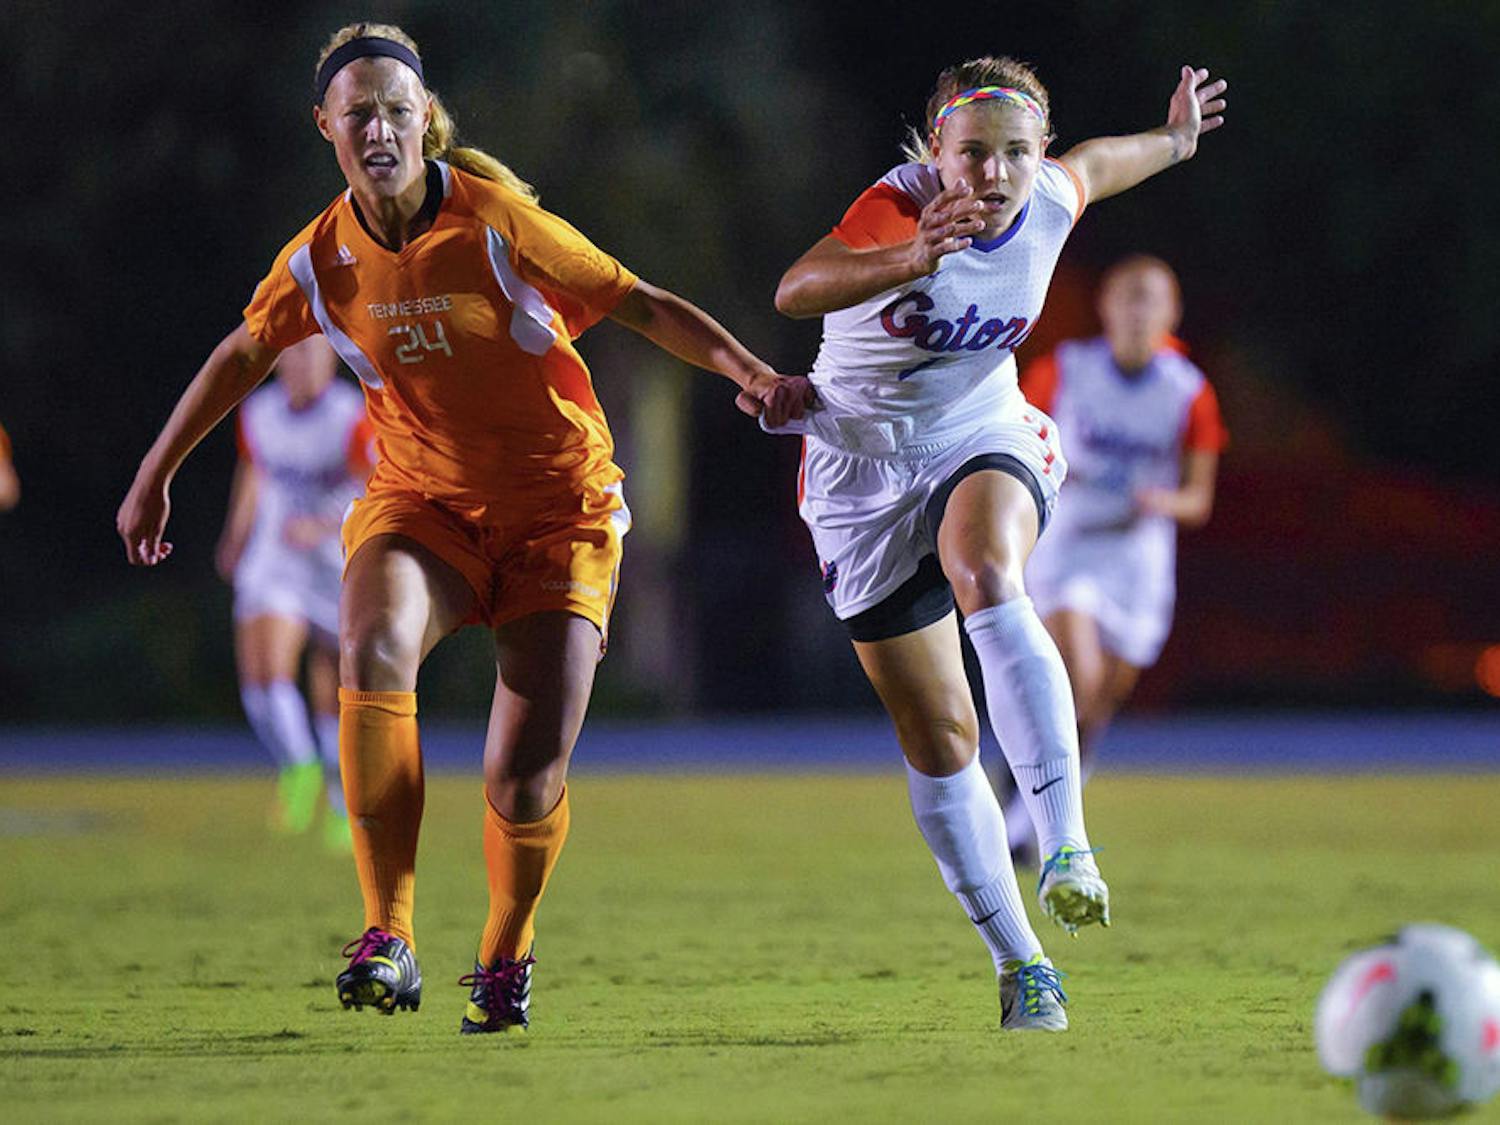 Savannah Jordan chases after the ball during Florida's 3-1 win against Tennessee on Friday.